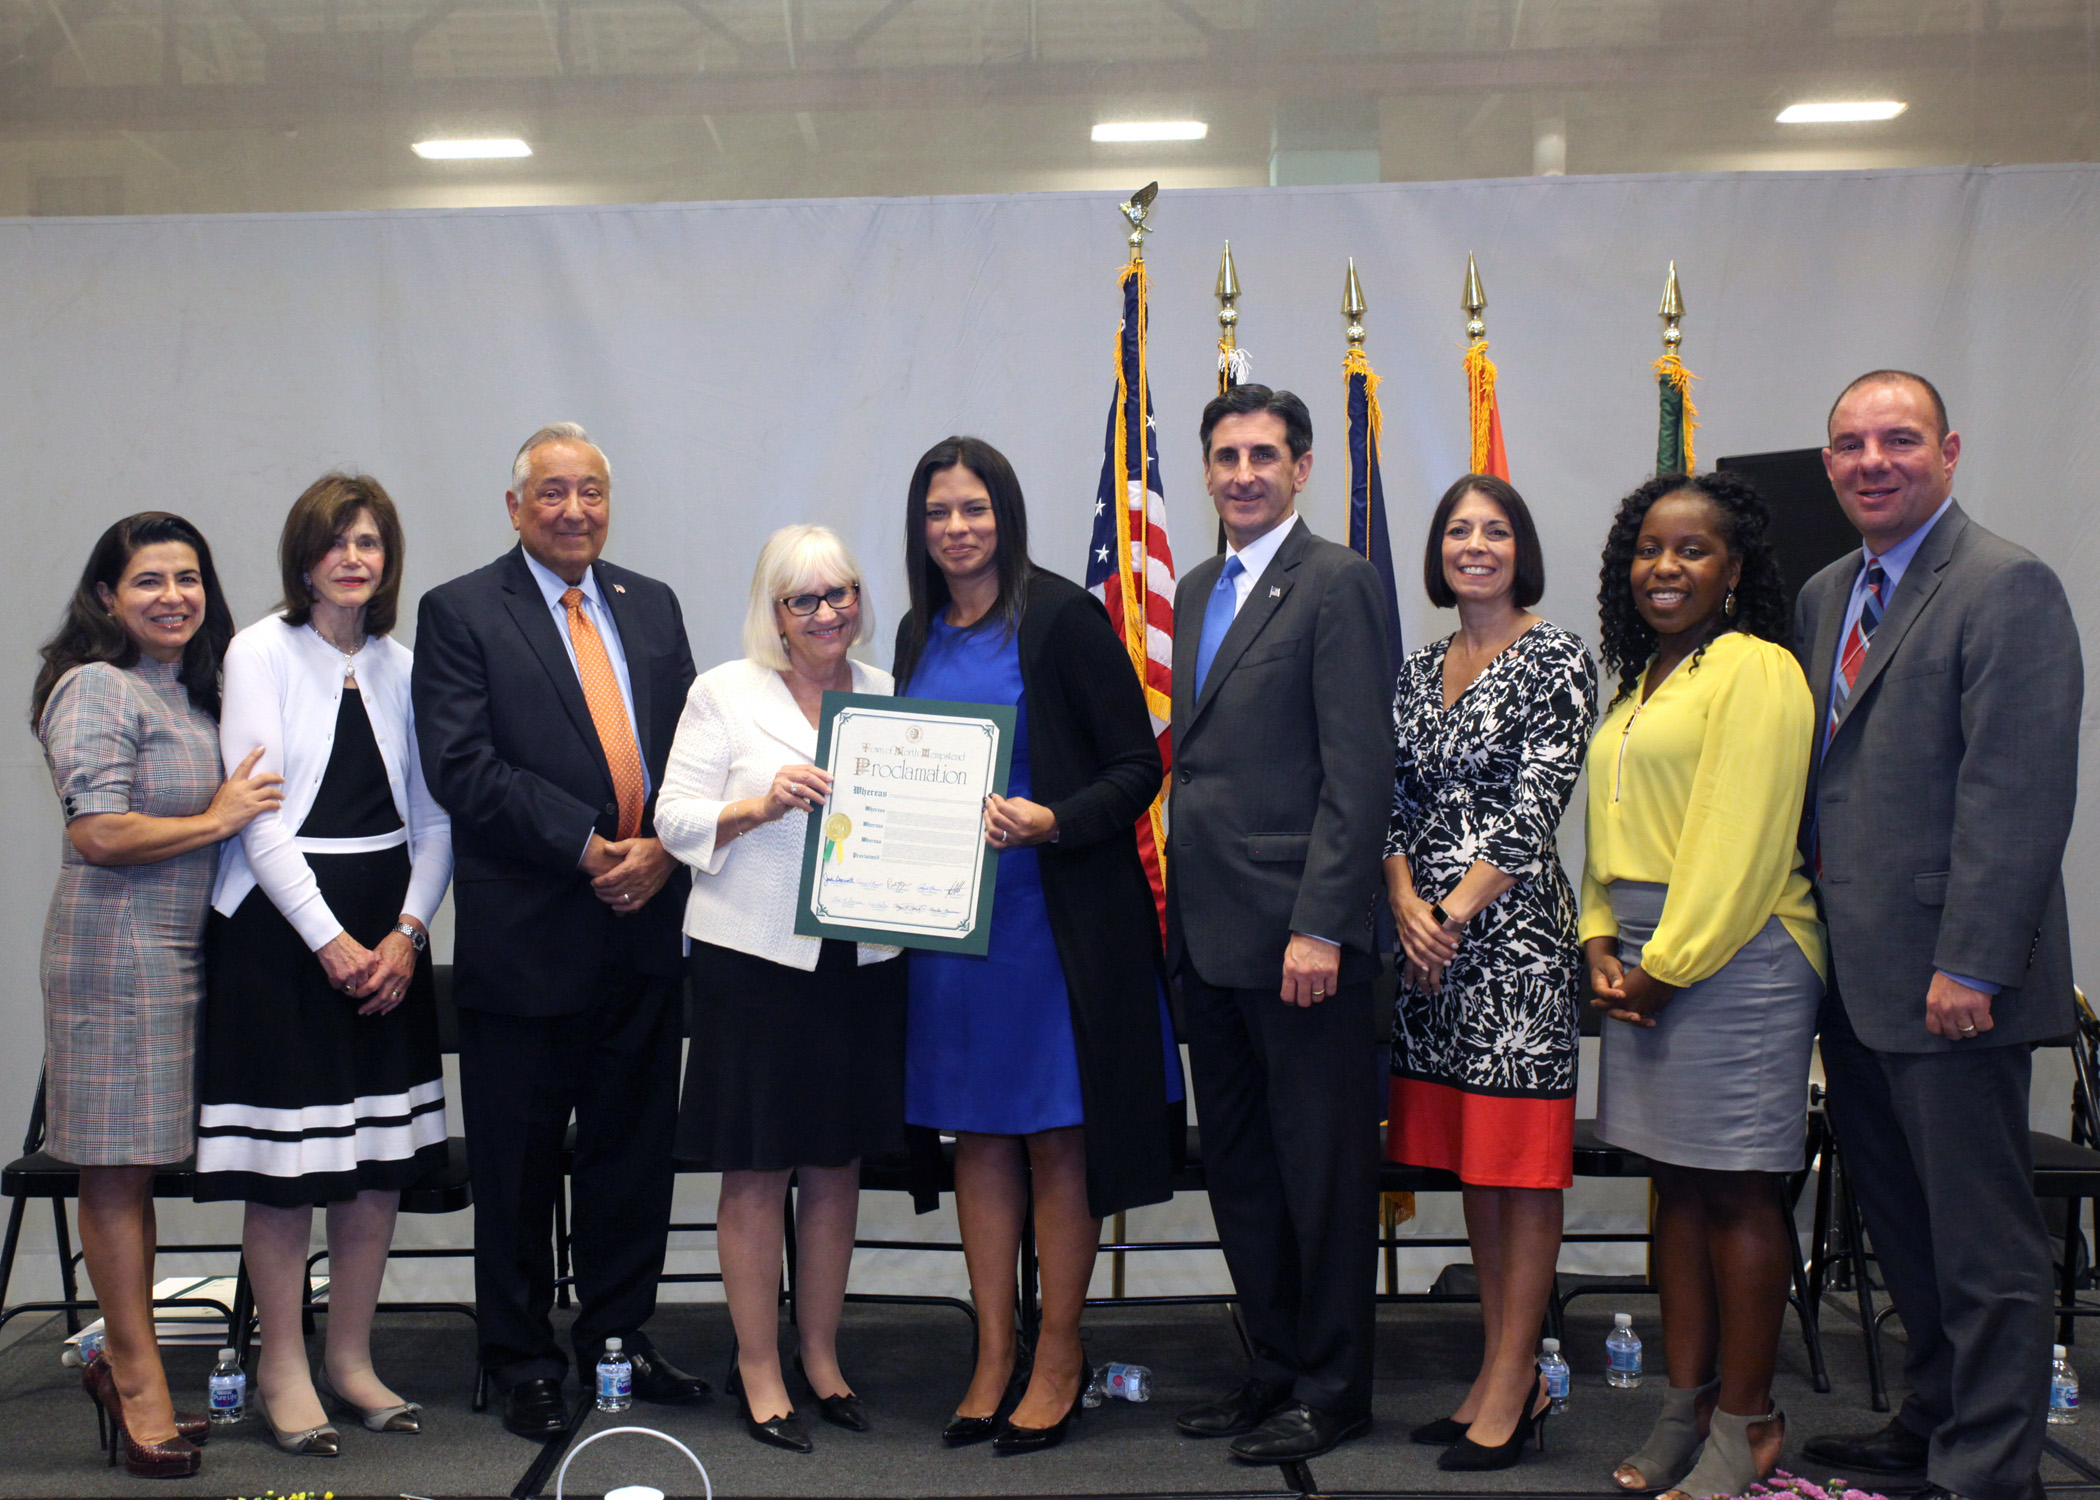 Saddle Rock Principal Luciana Bradley receives a proclamation from Town Supervisor Judi Bosworth and the Town Council at the Town of North Hempstead Hispanic Heritage Celebration on Oct. 10. (Photo courtesy of the Town of North Hempstead)